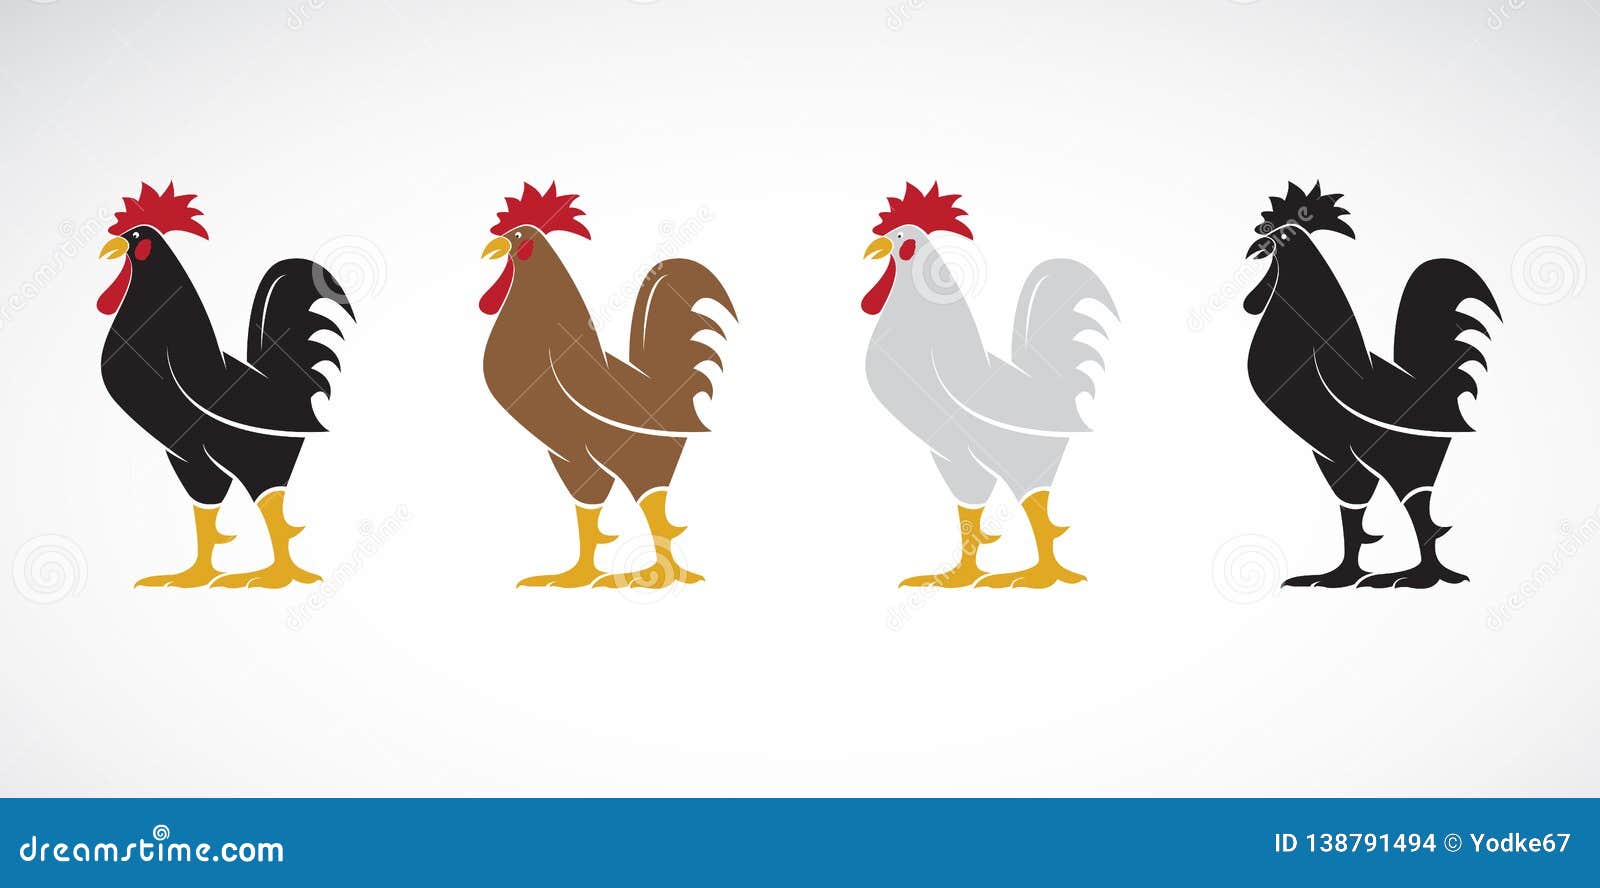 Download Vector Of Rooster Or Design On White Background. Animal ...